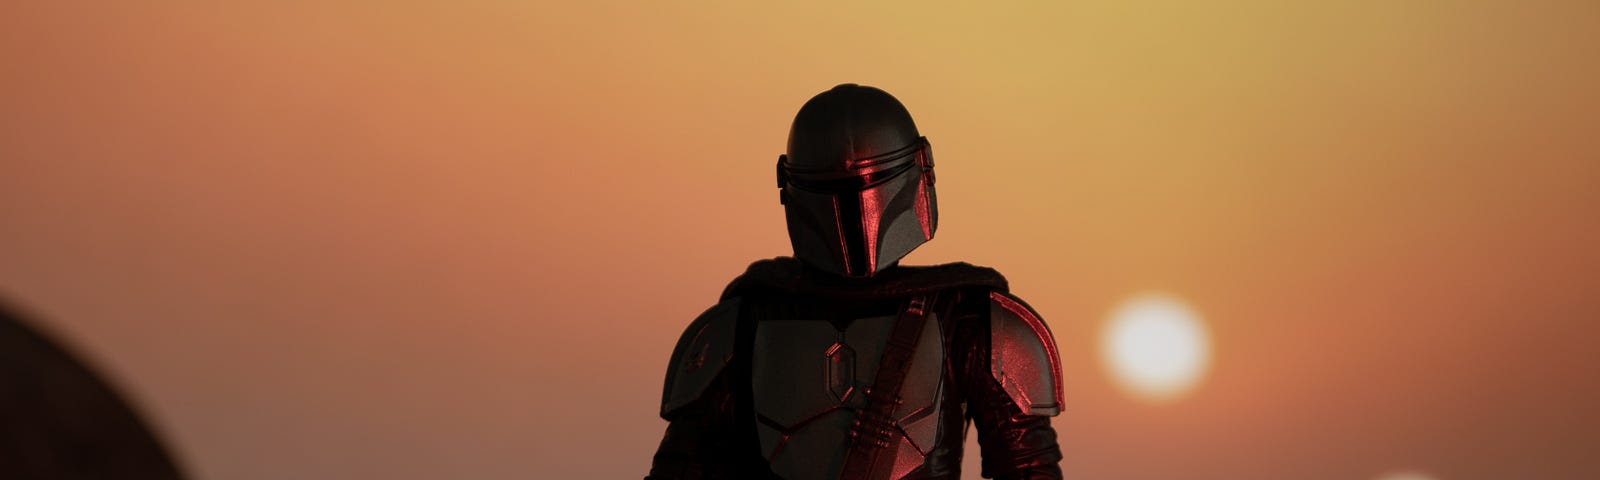 A picture of the Mandalorian in the sunset